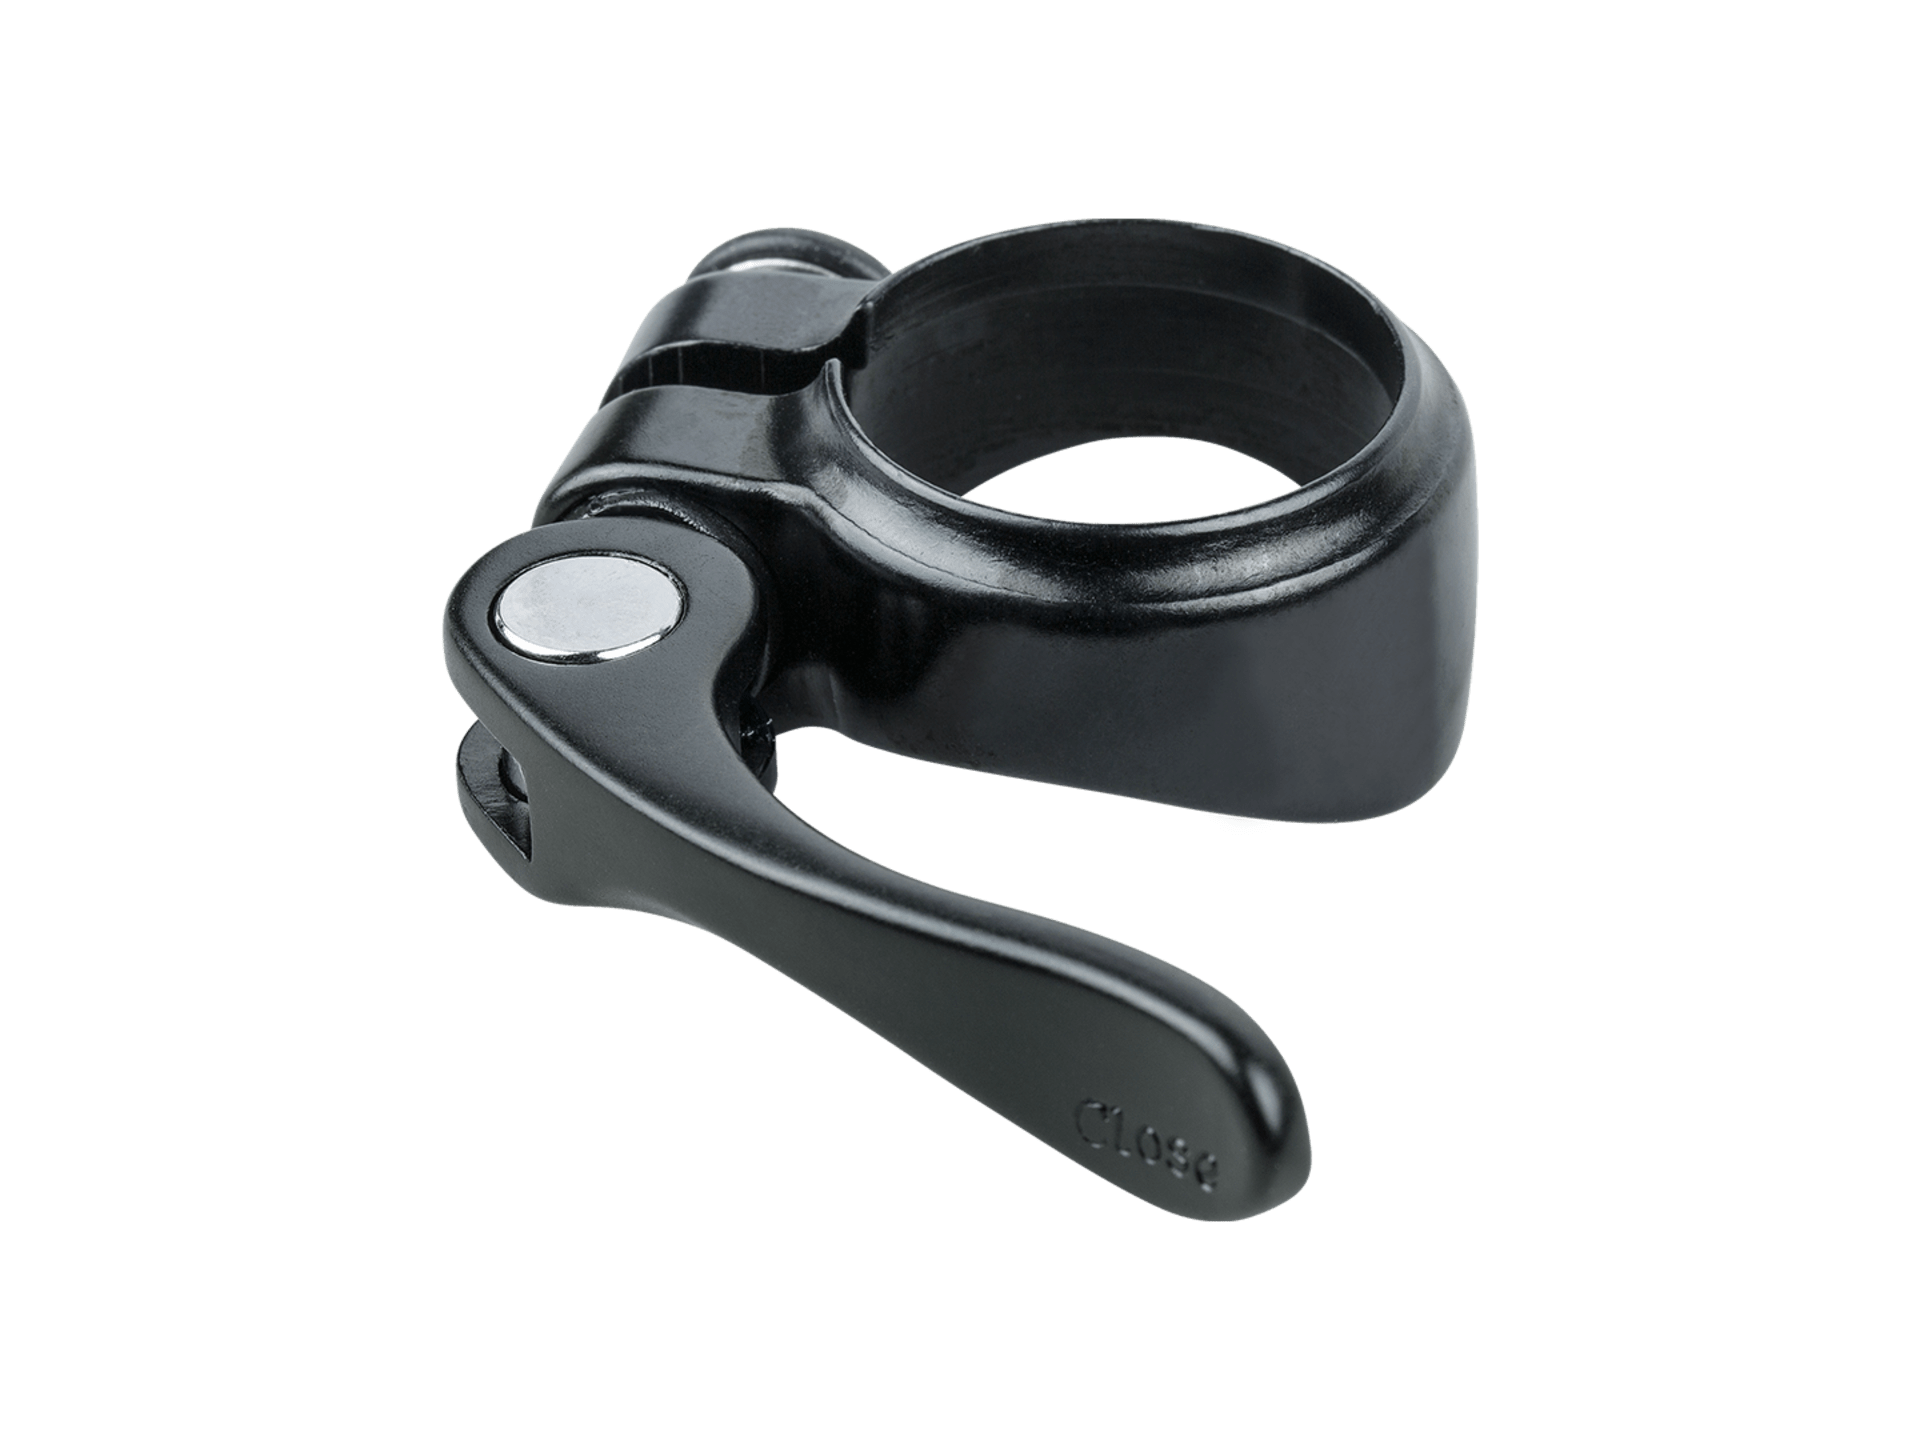 Electra Quick Release Seat Collar